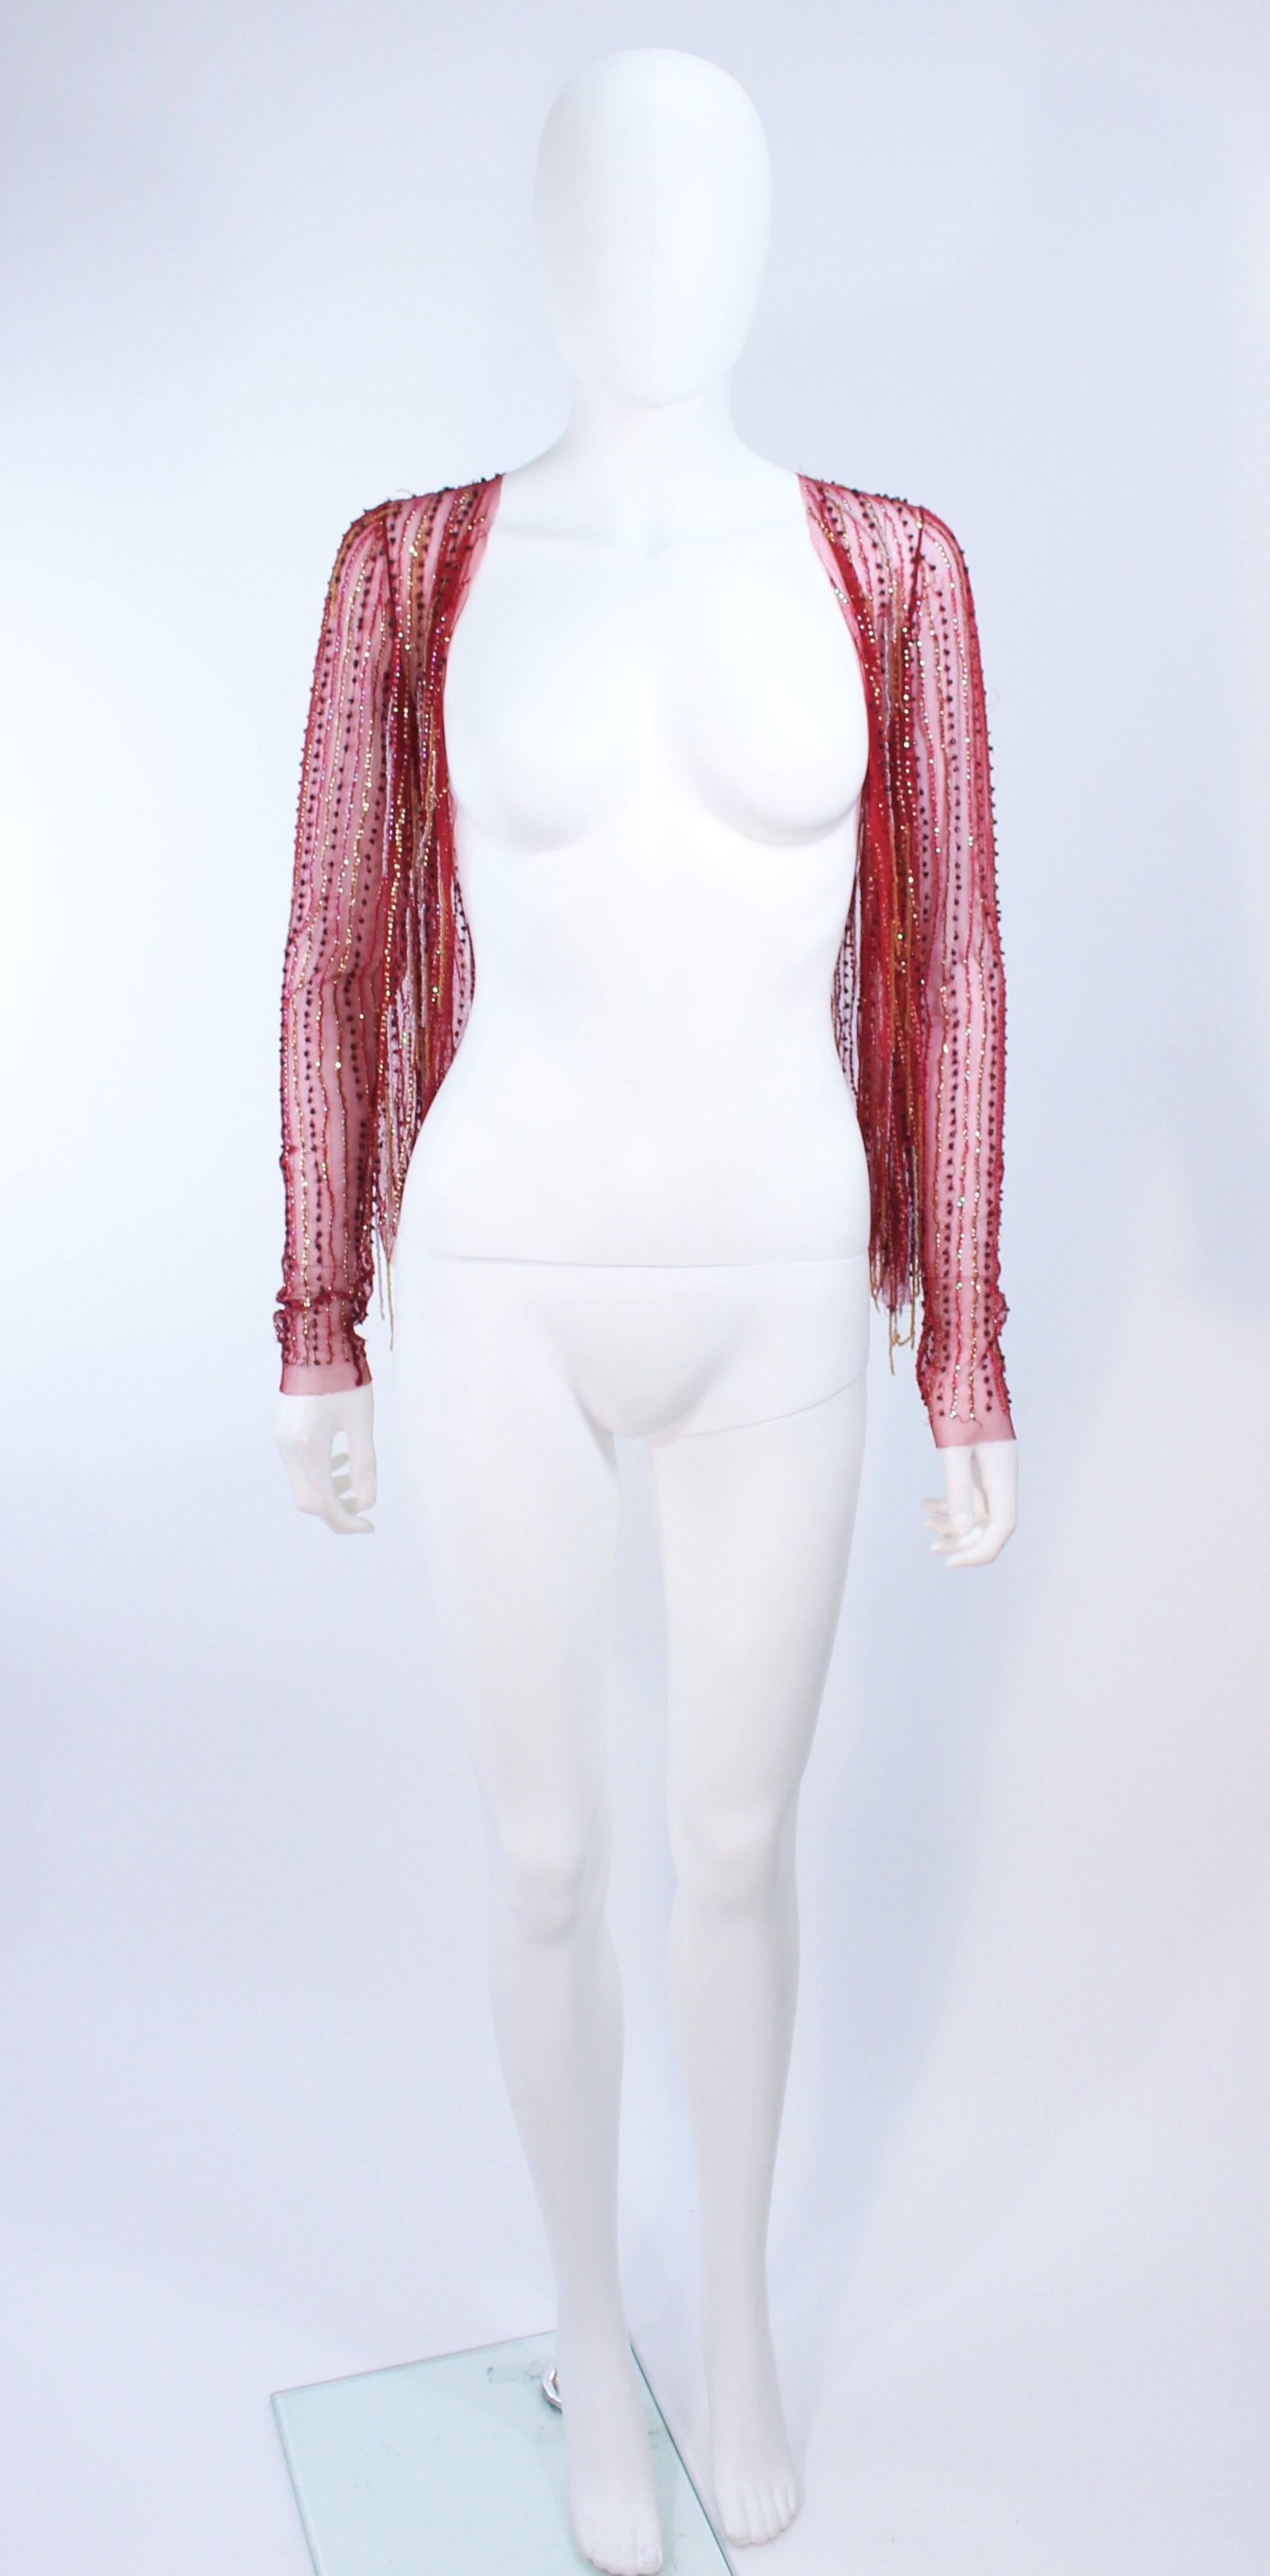 This top is composed of a stretch red mesh with beaded fringe applique. Features an open style. In excellent vintage condition.

**Please cross-reference measurements for personal accuracy. Size in description box is an estimation.

Measures